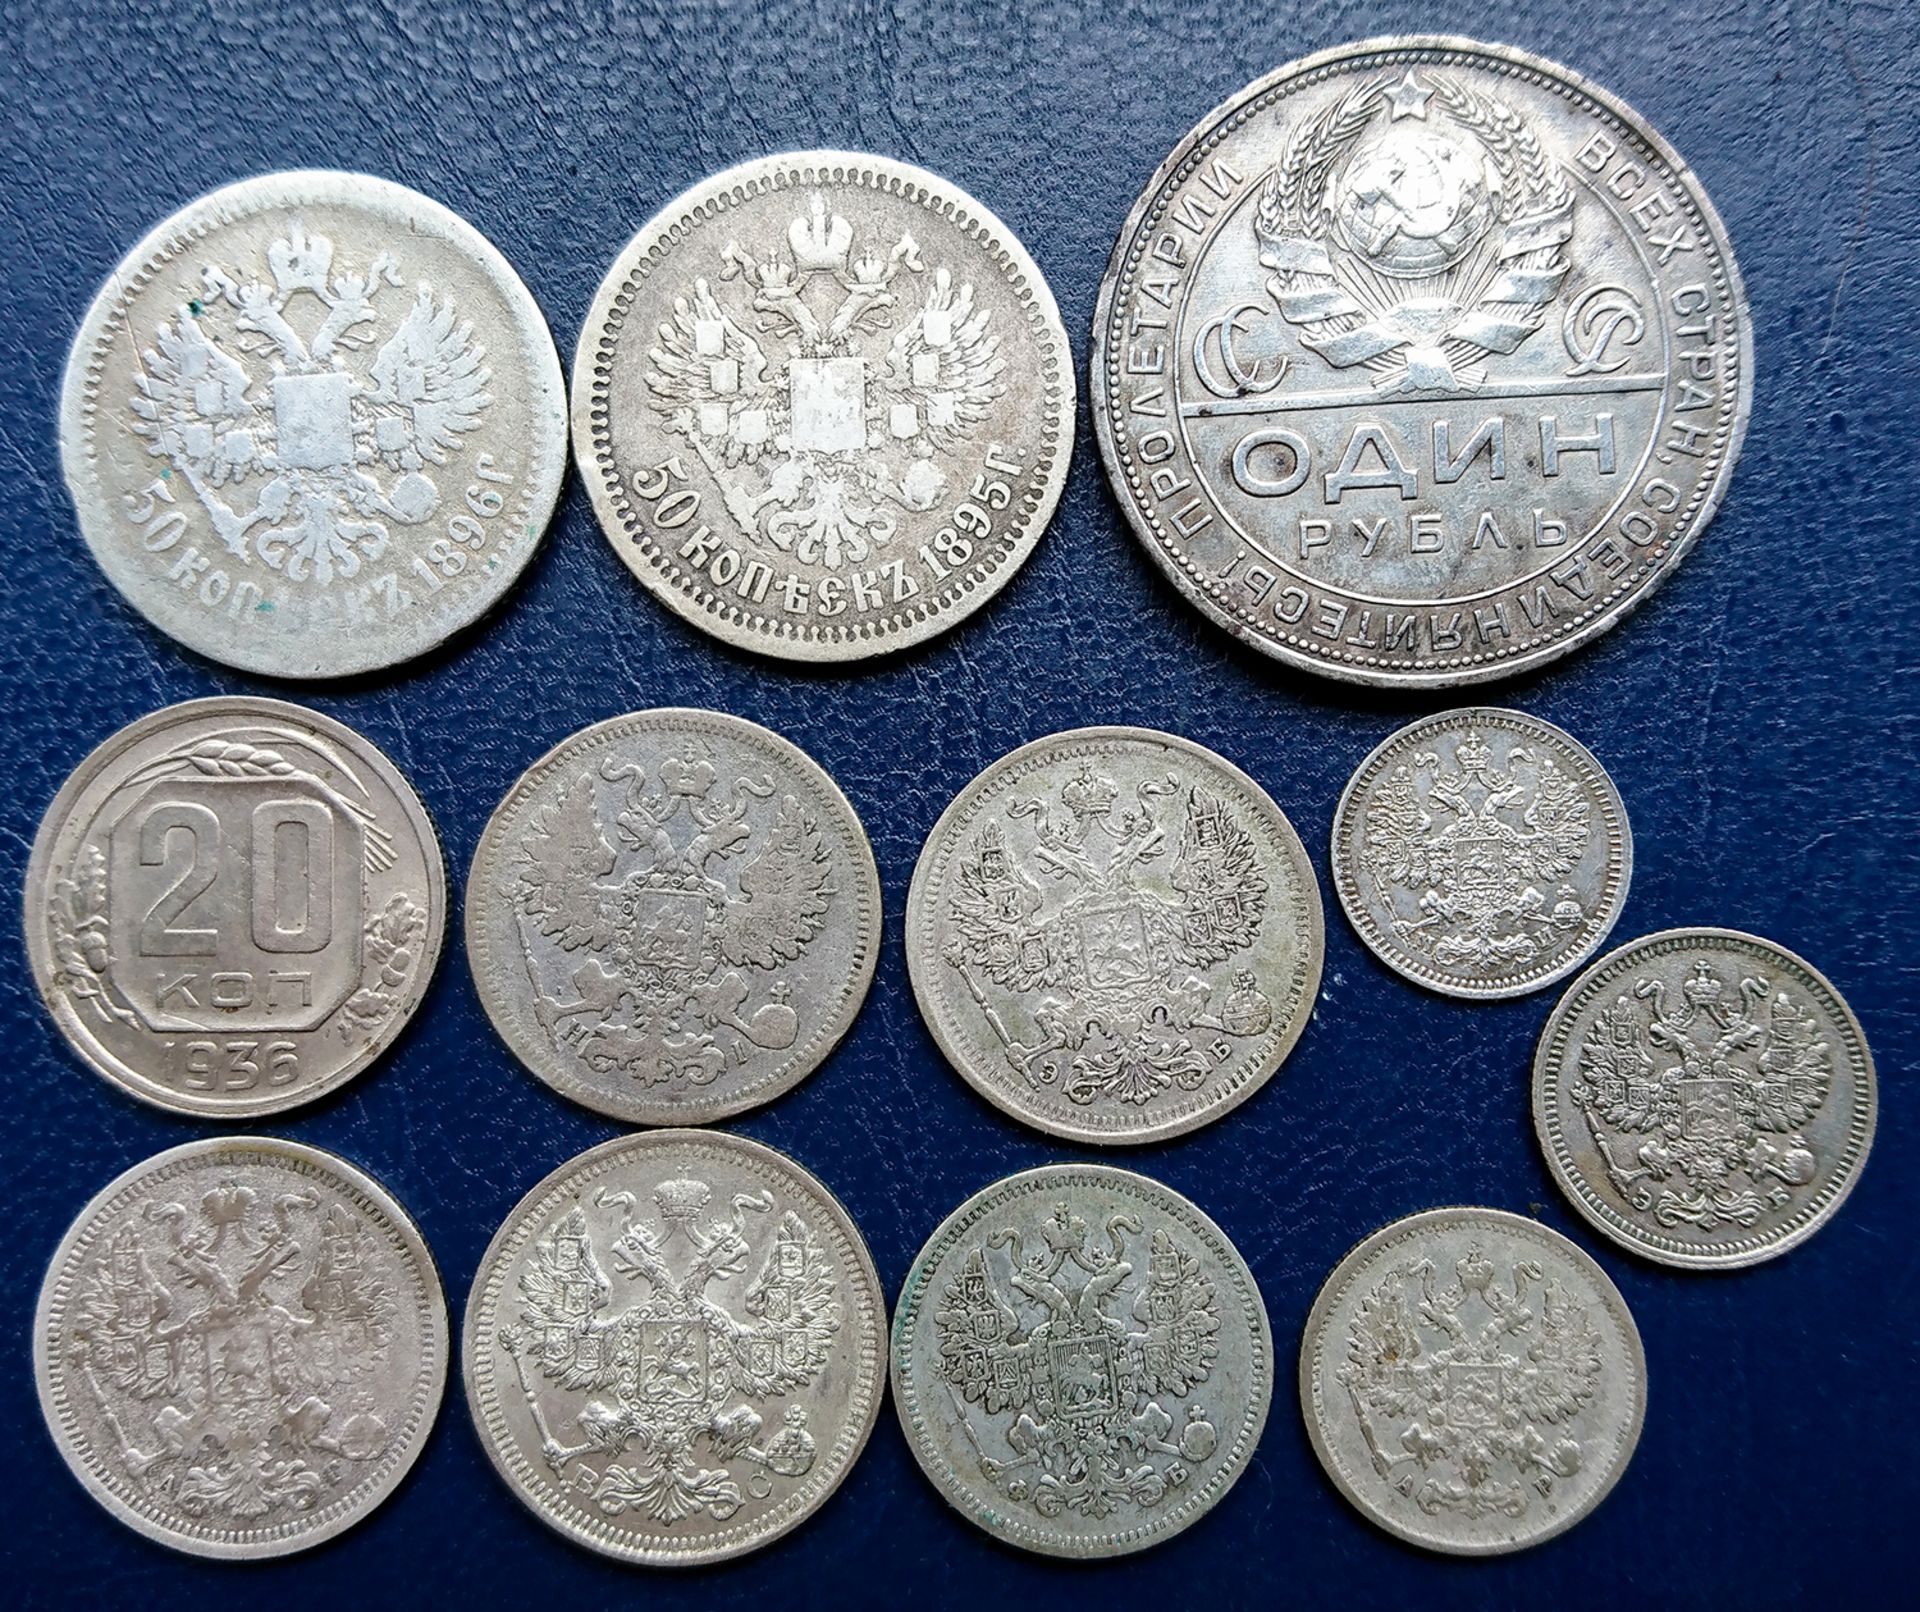 Russia - Silver & Copper Roubles / Kopeks etc. (14) from 1794, some good grades. - Image 4 of 4